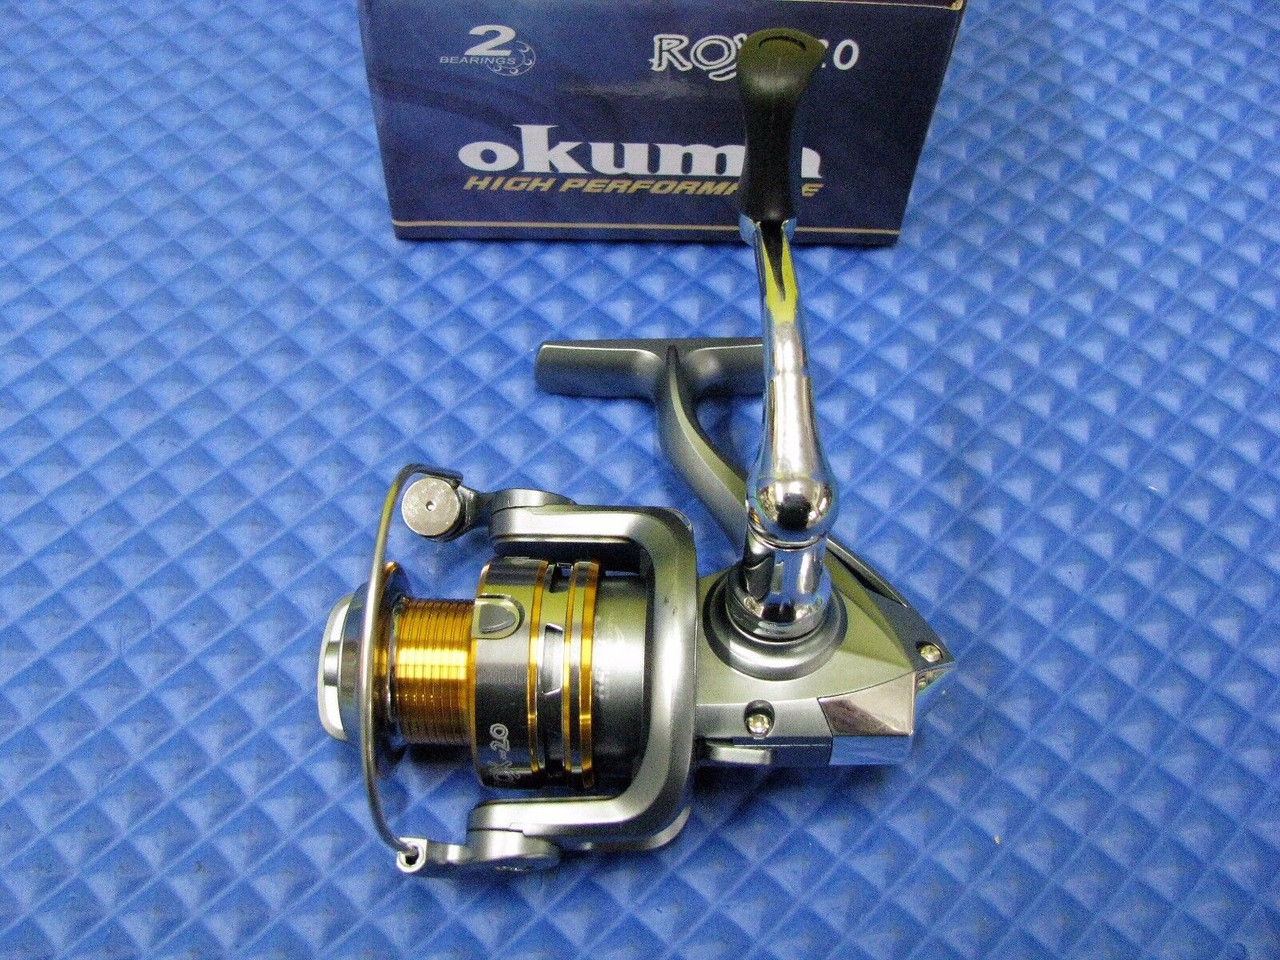 How To Choose A Spinning Reel